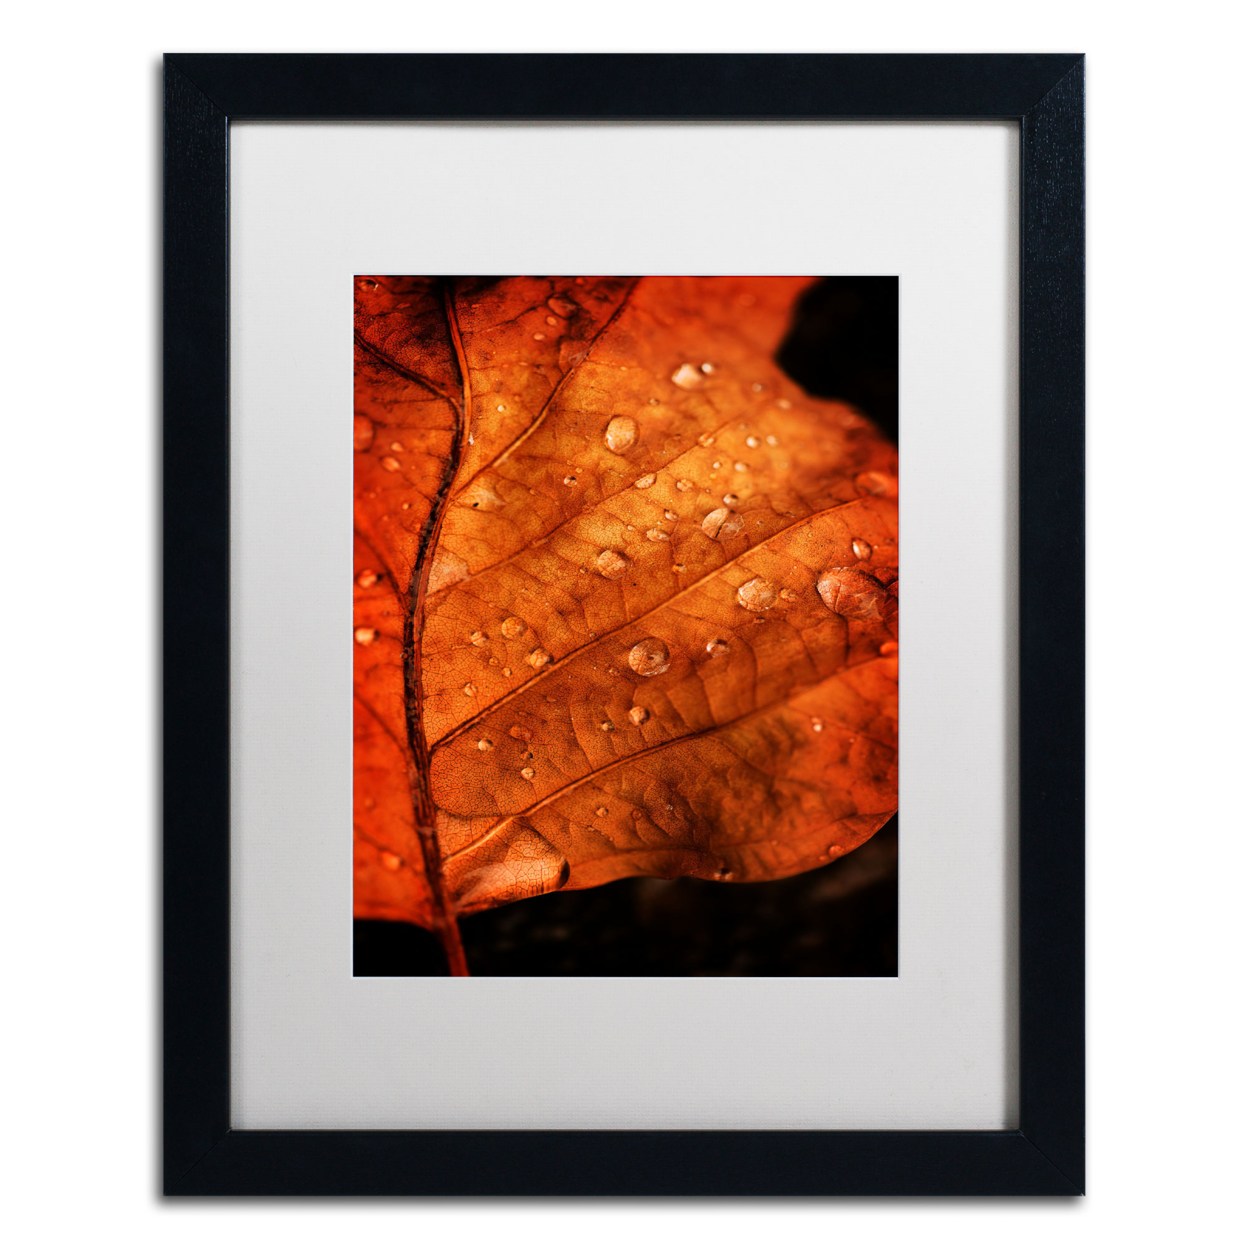 Philippe Sainte-Laudy 'Autumn Droplets' Black Wooden Framed Art 18 X 22 Inches